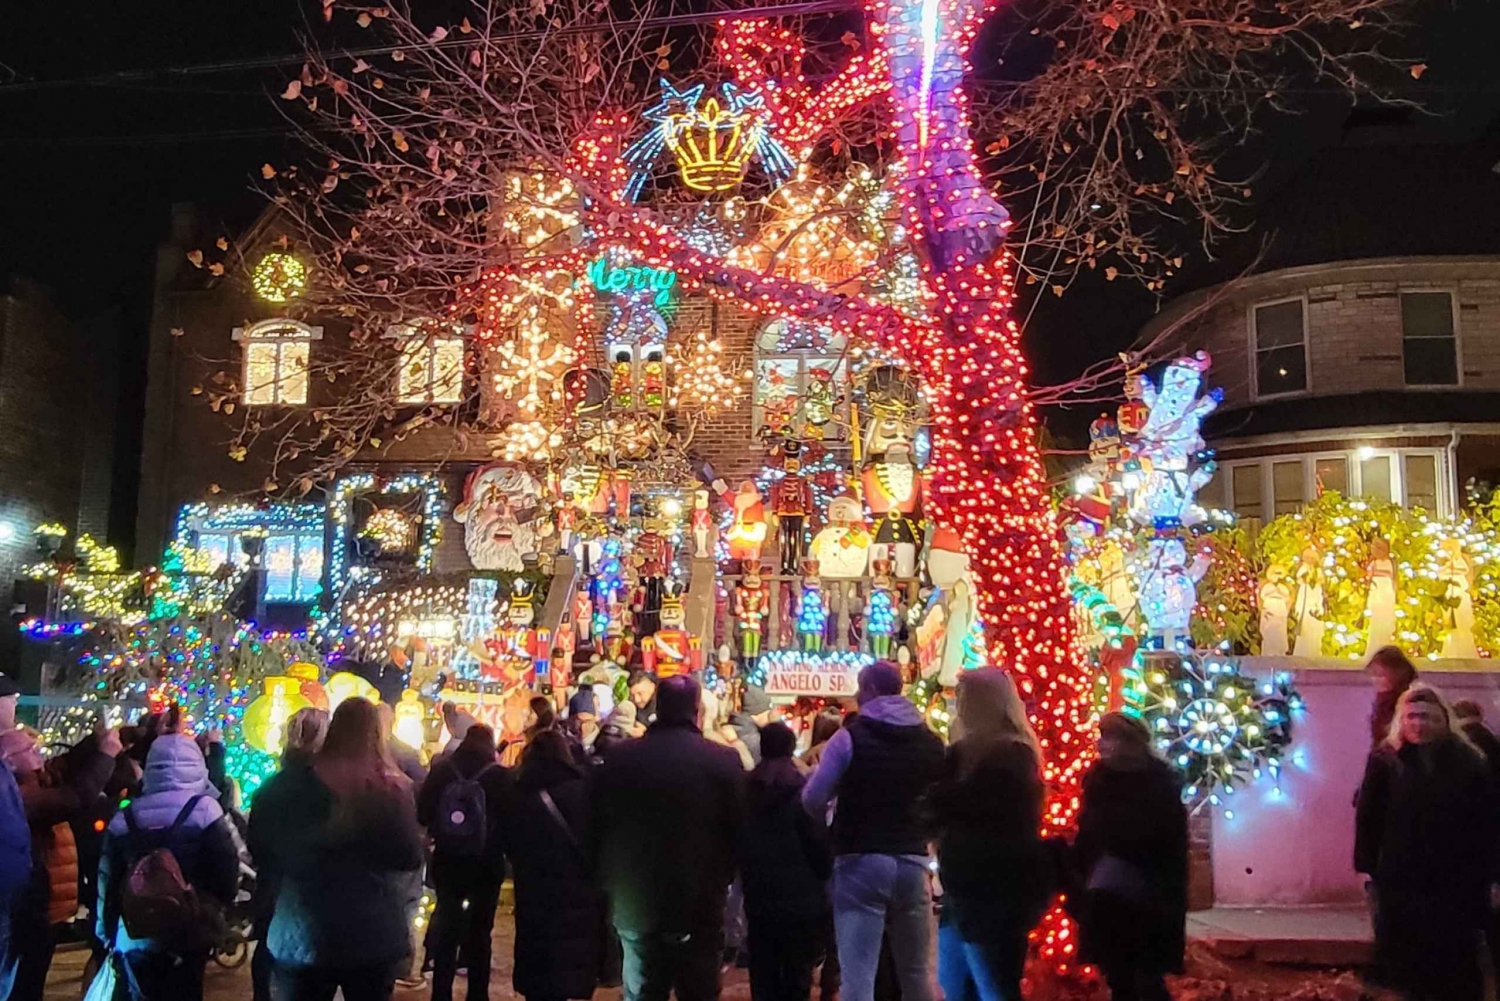 Attending-the-Dyker-Heights-Christmas-Lights-Display